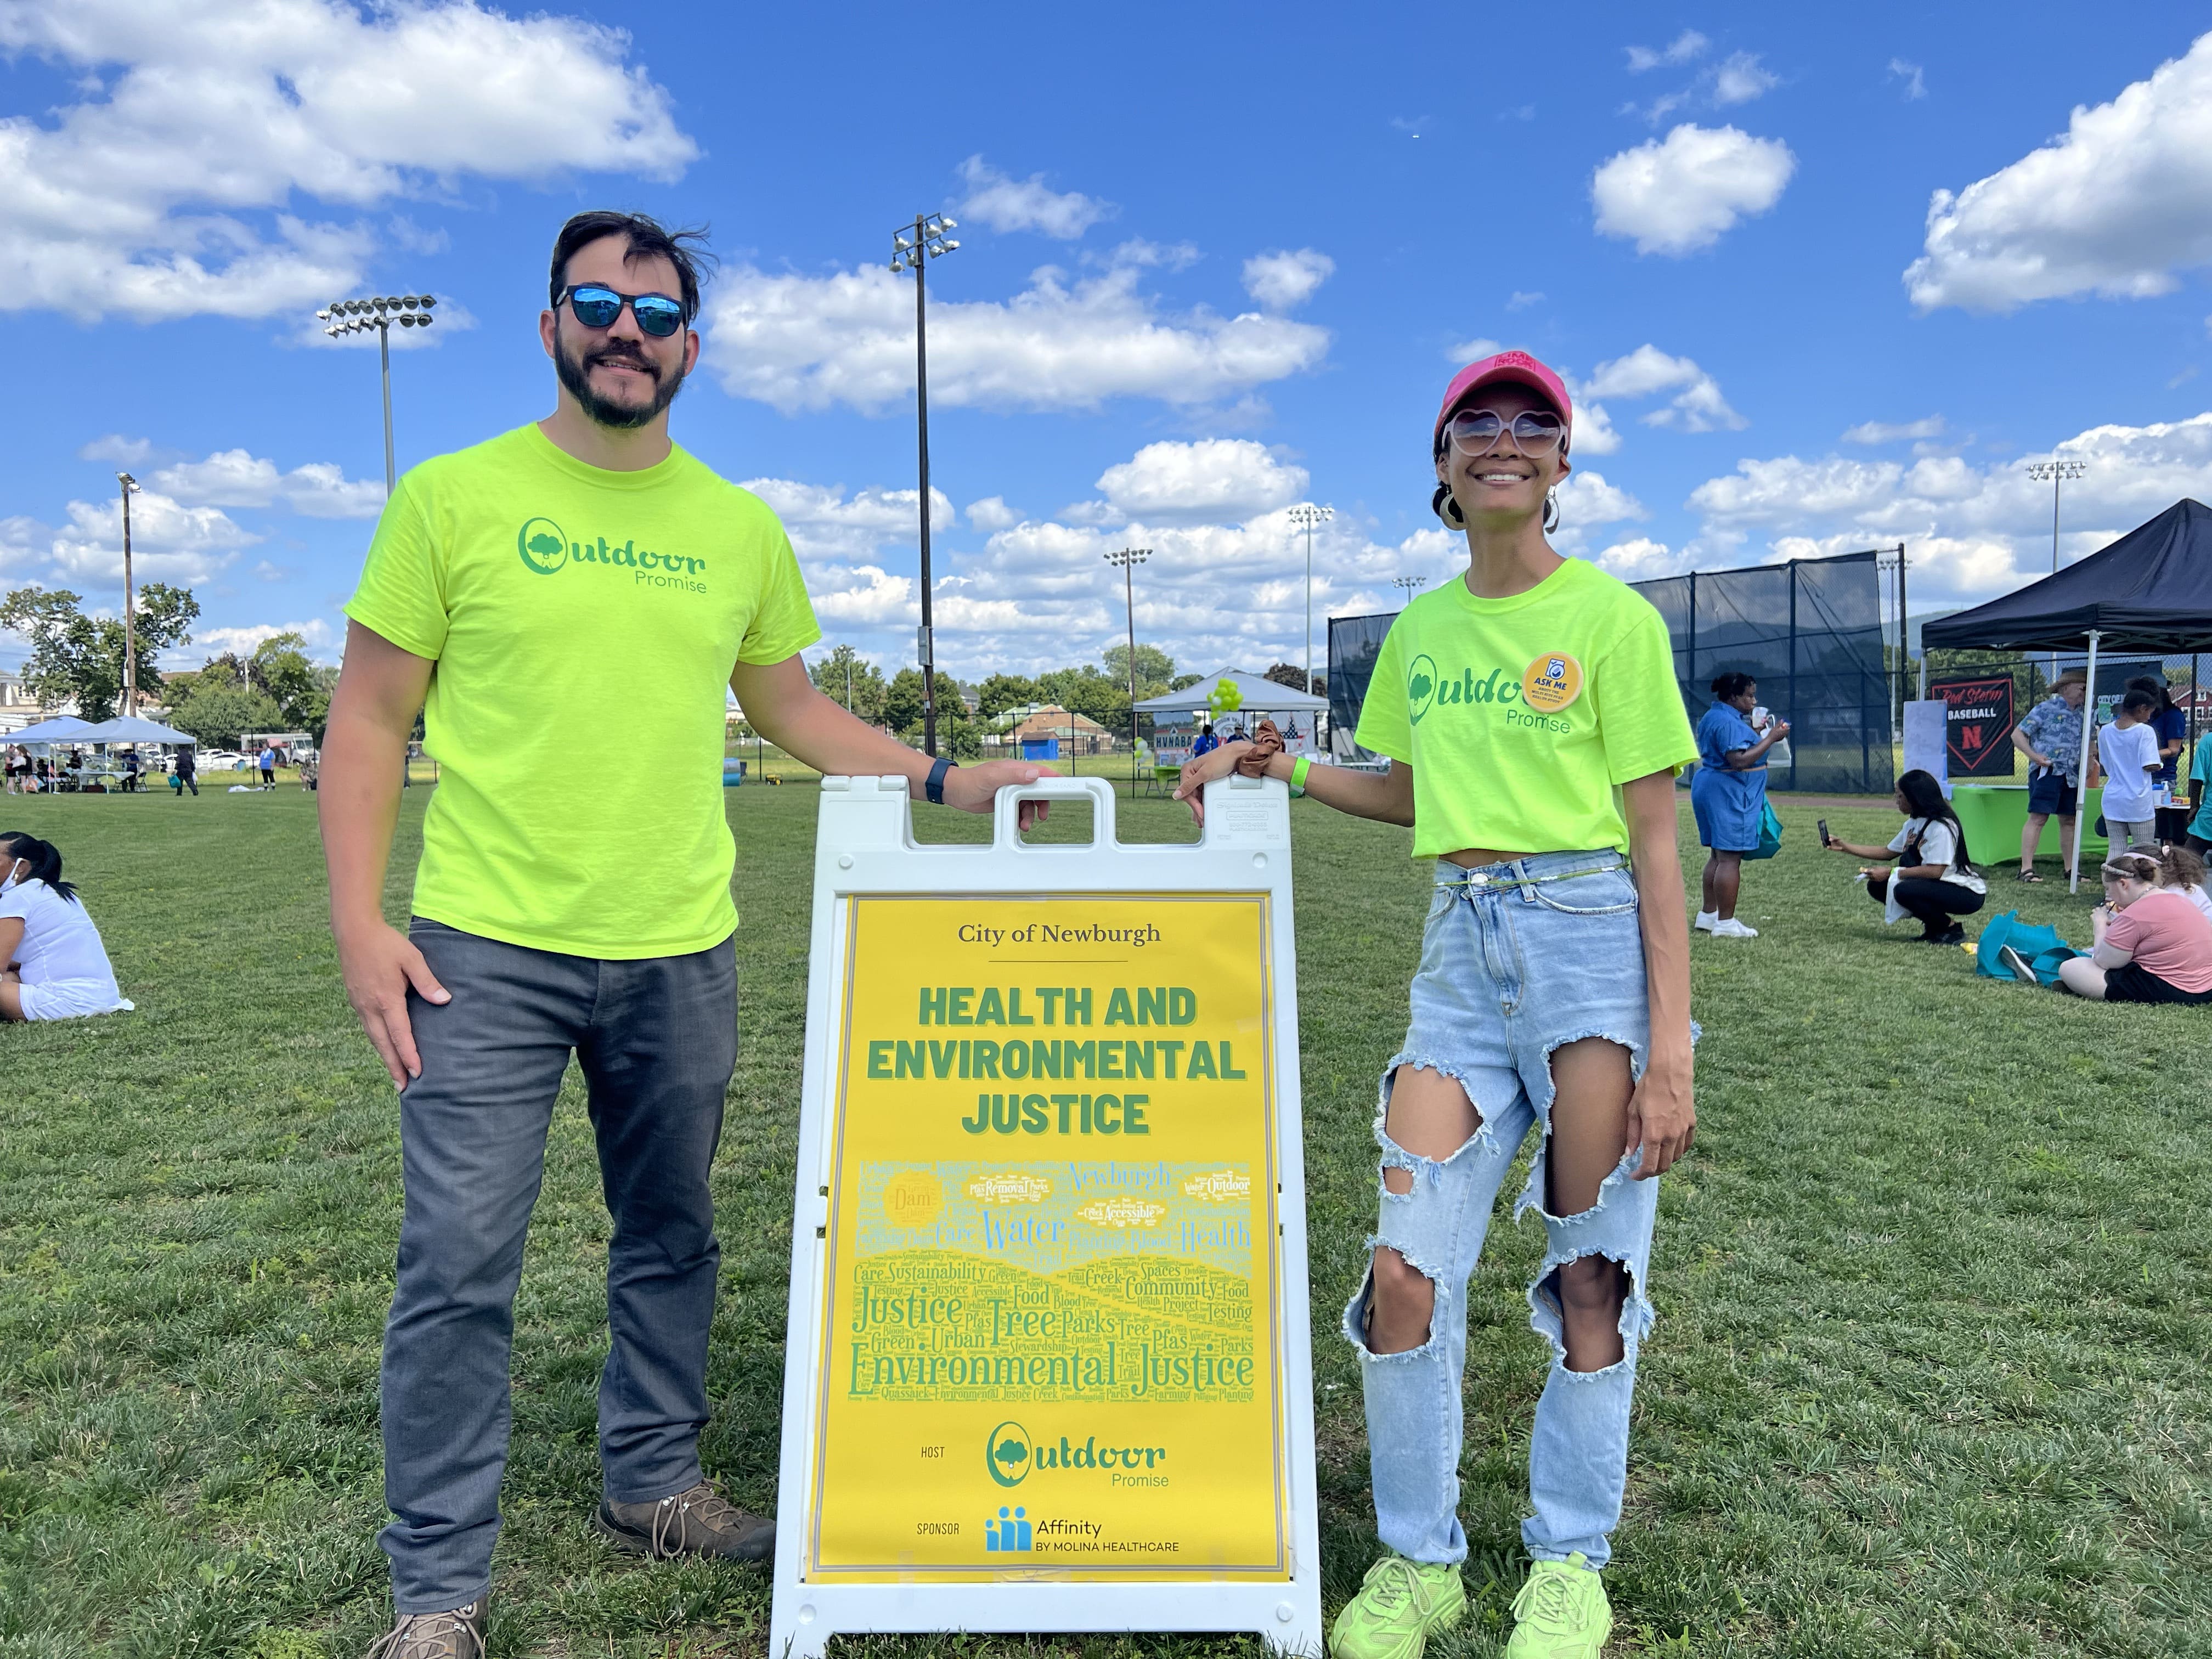 Ronald Zorrilla and Kathryn McKenzie standing next to the Health and Environmental Justice poster at the City of Newburgh Love Our City Event